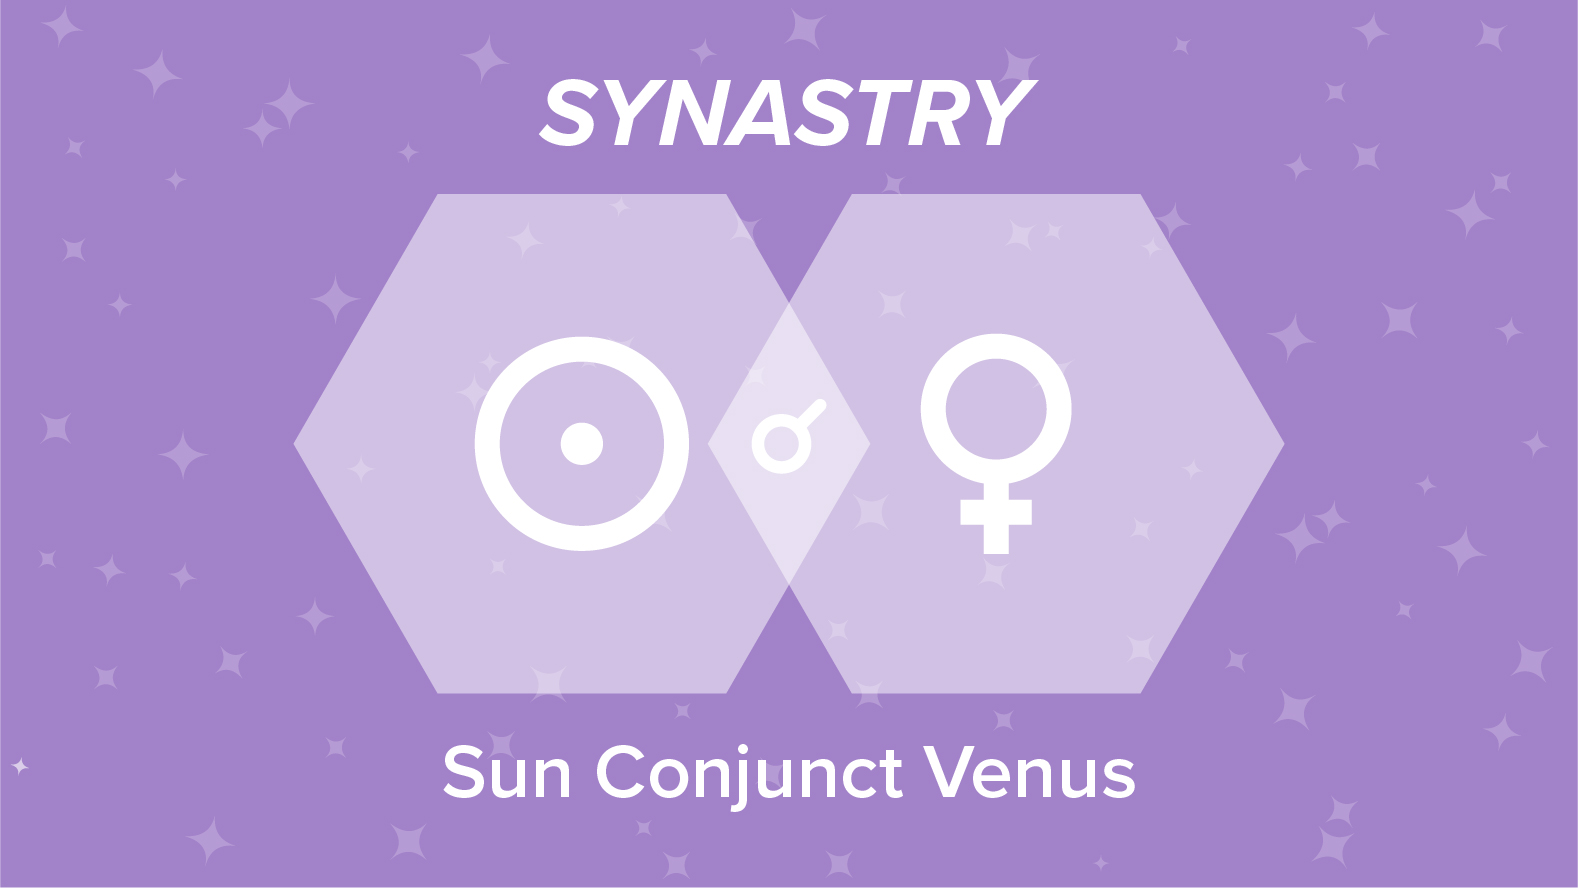 Sun Conjunct Venus Synastry: Relationships and Friendships Explained